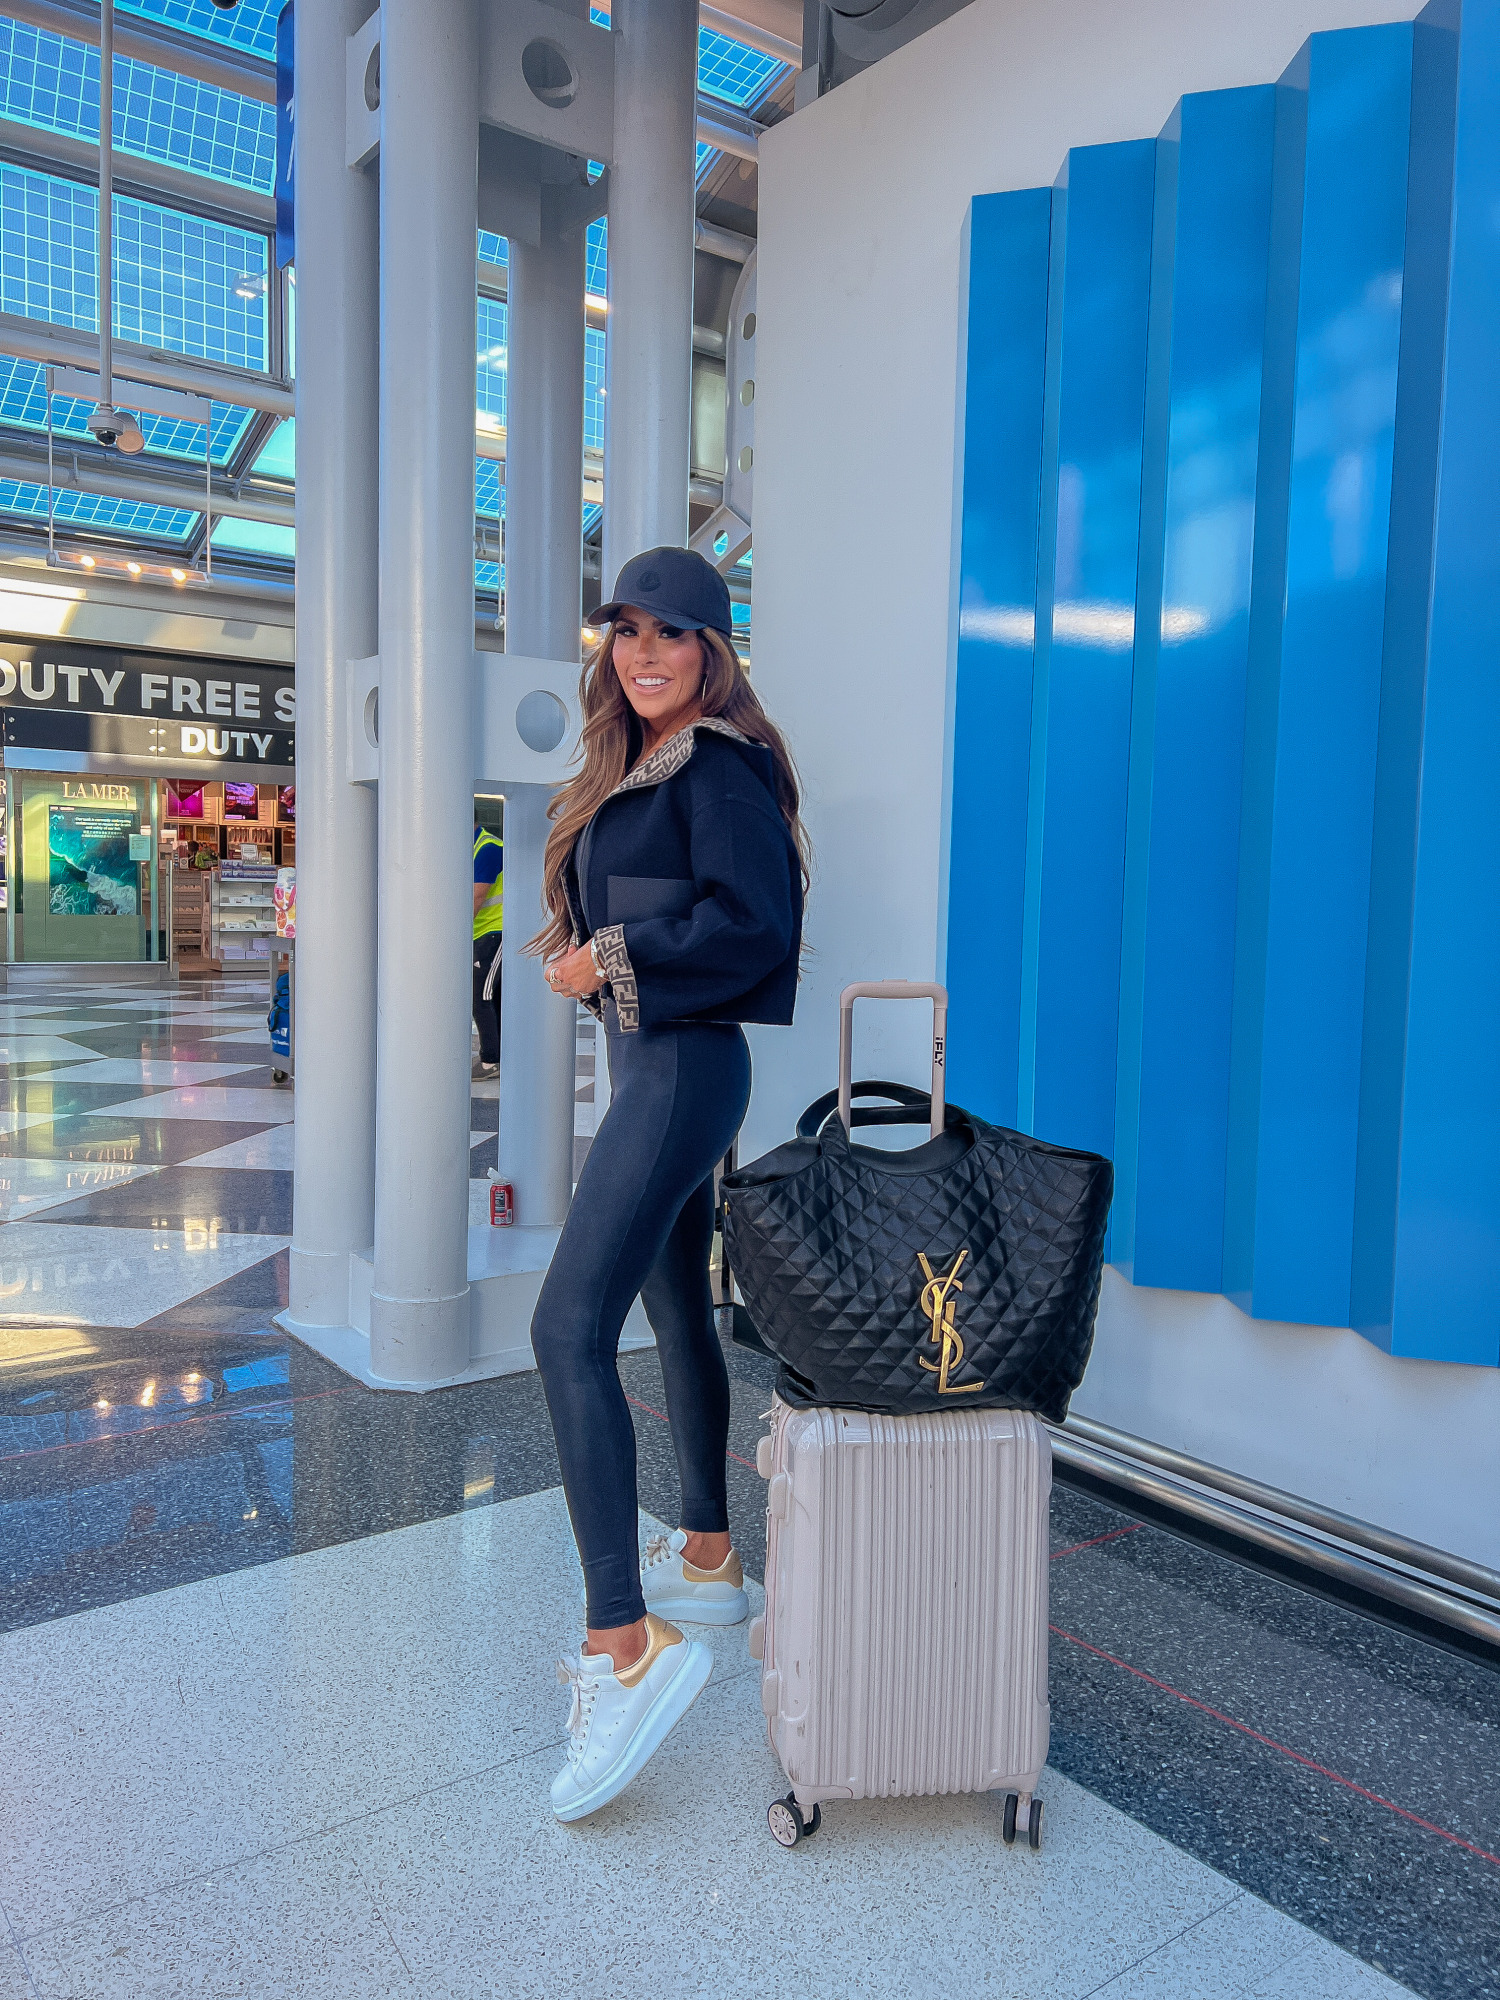 fendi reversible jacket, YSL icare maxi tote, what to wear and pack on overnight flight to europe, moncler ball cap, casual stylish airport outfit idea pinterest